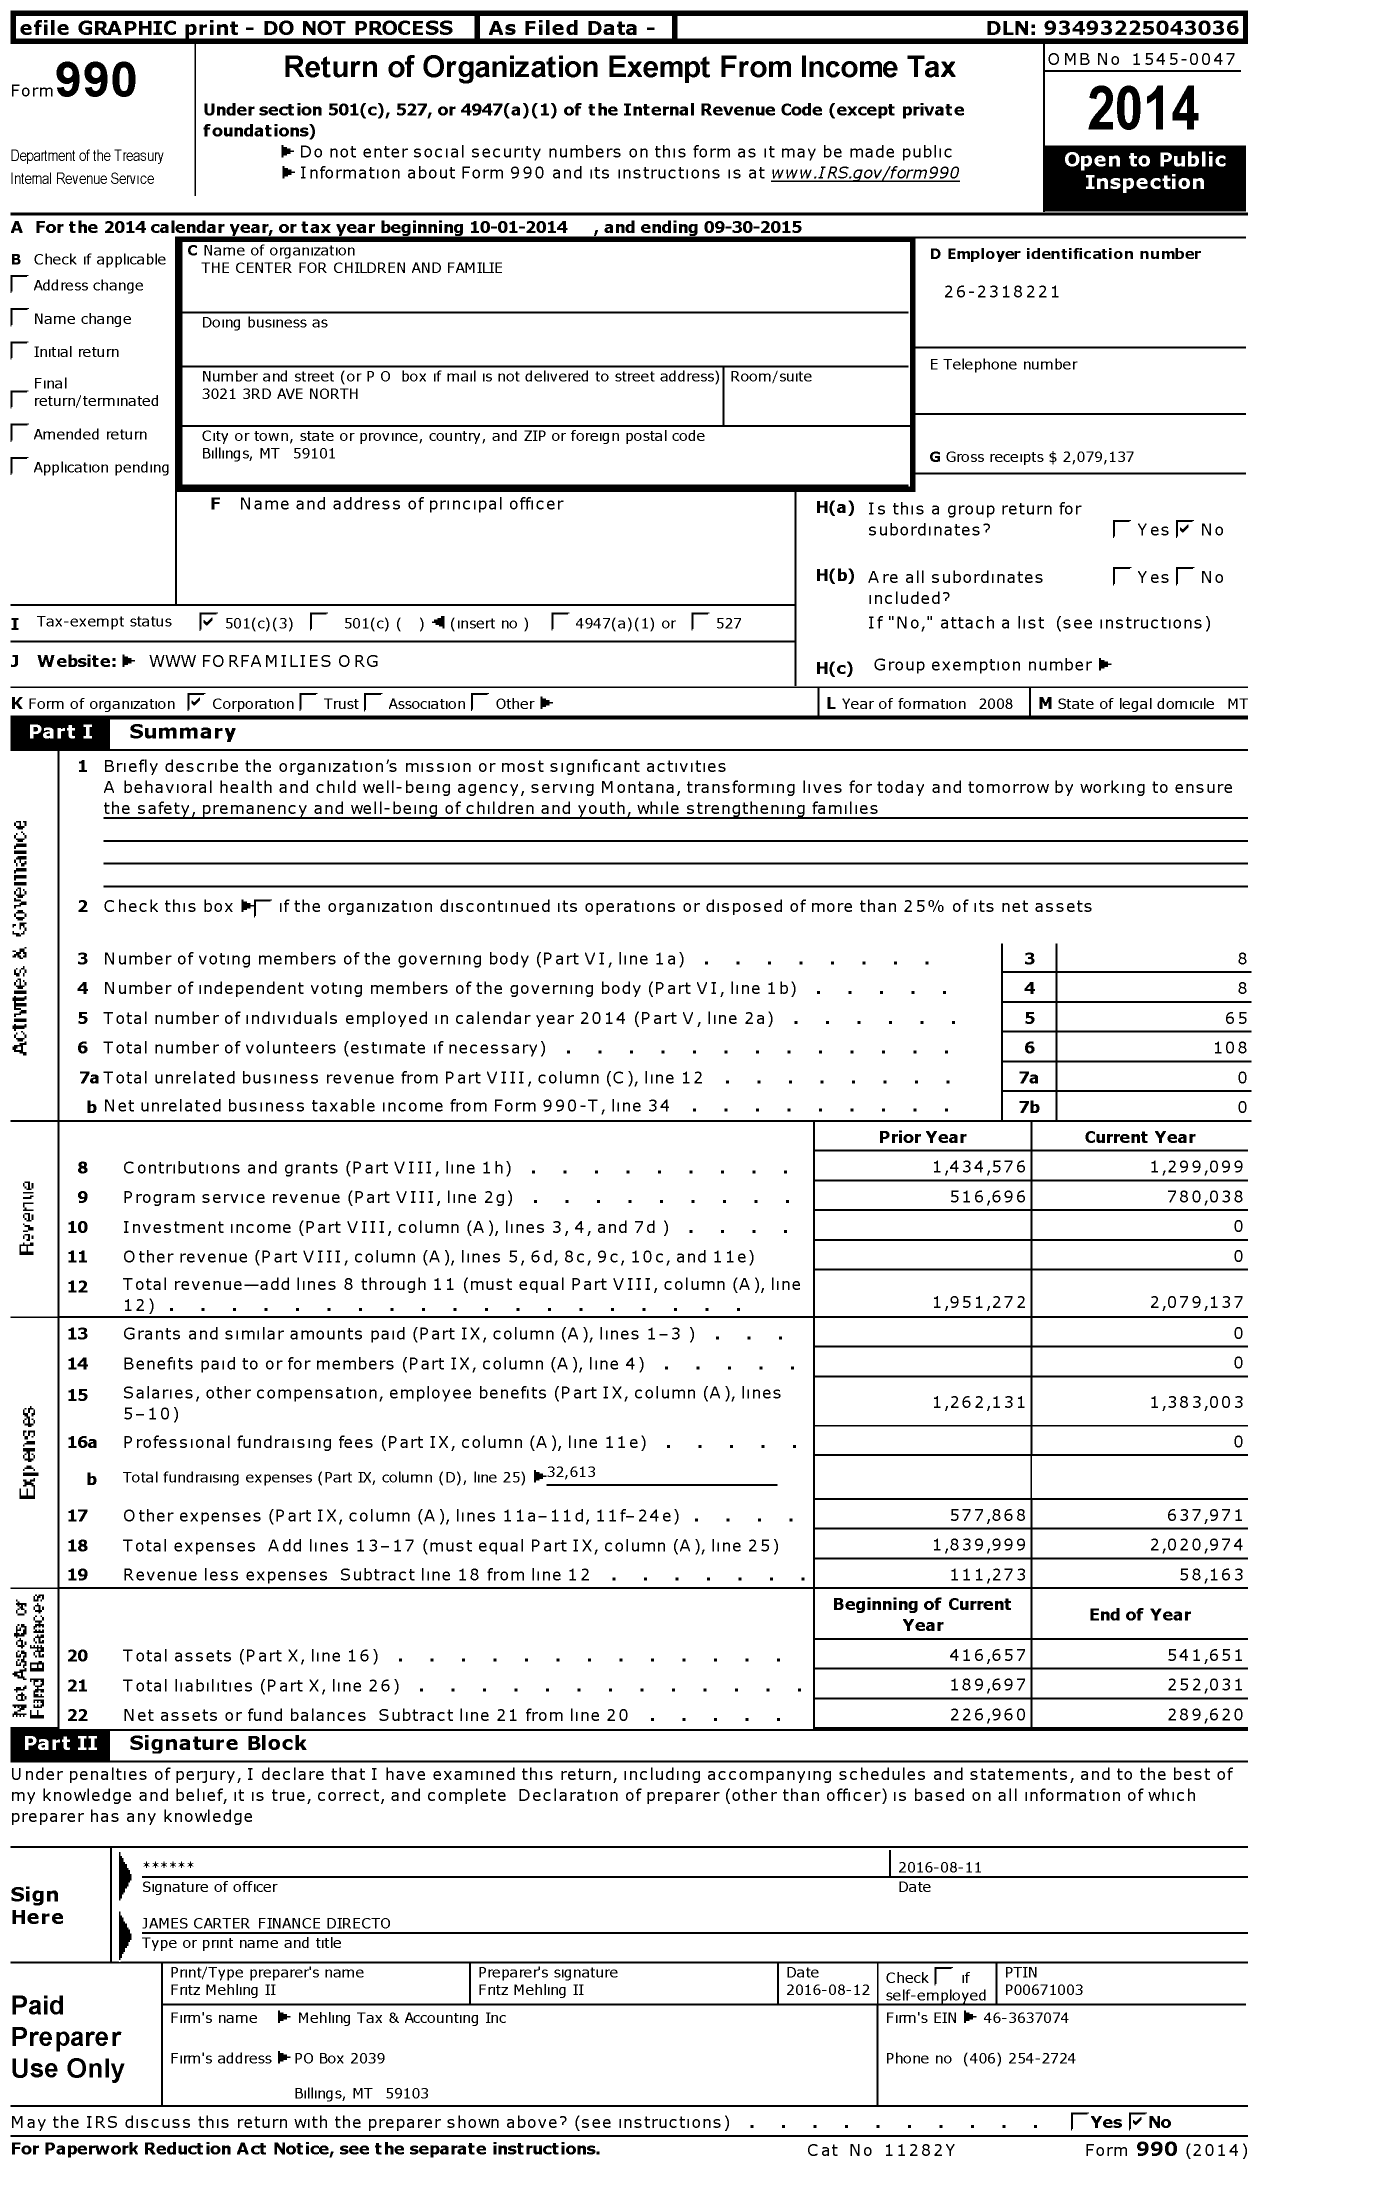 Image of first page of 2014 Form 990 for The Center for Children and Families